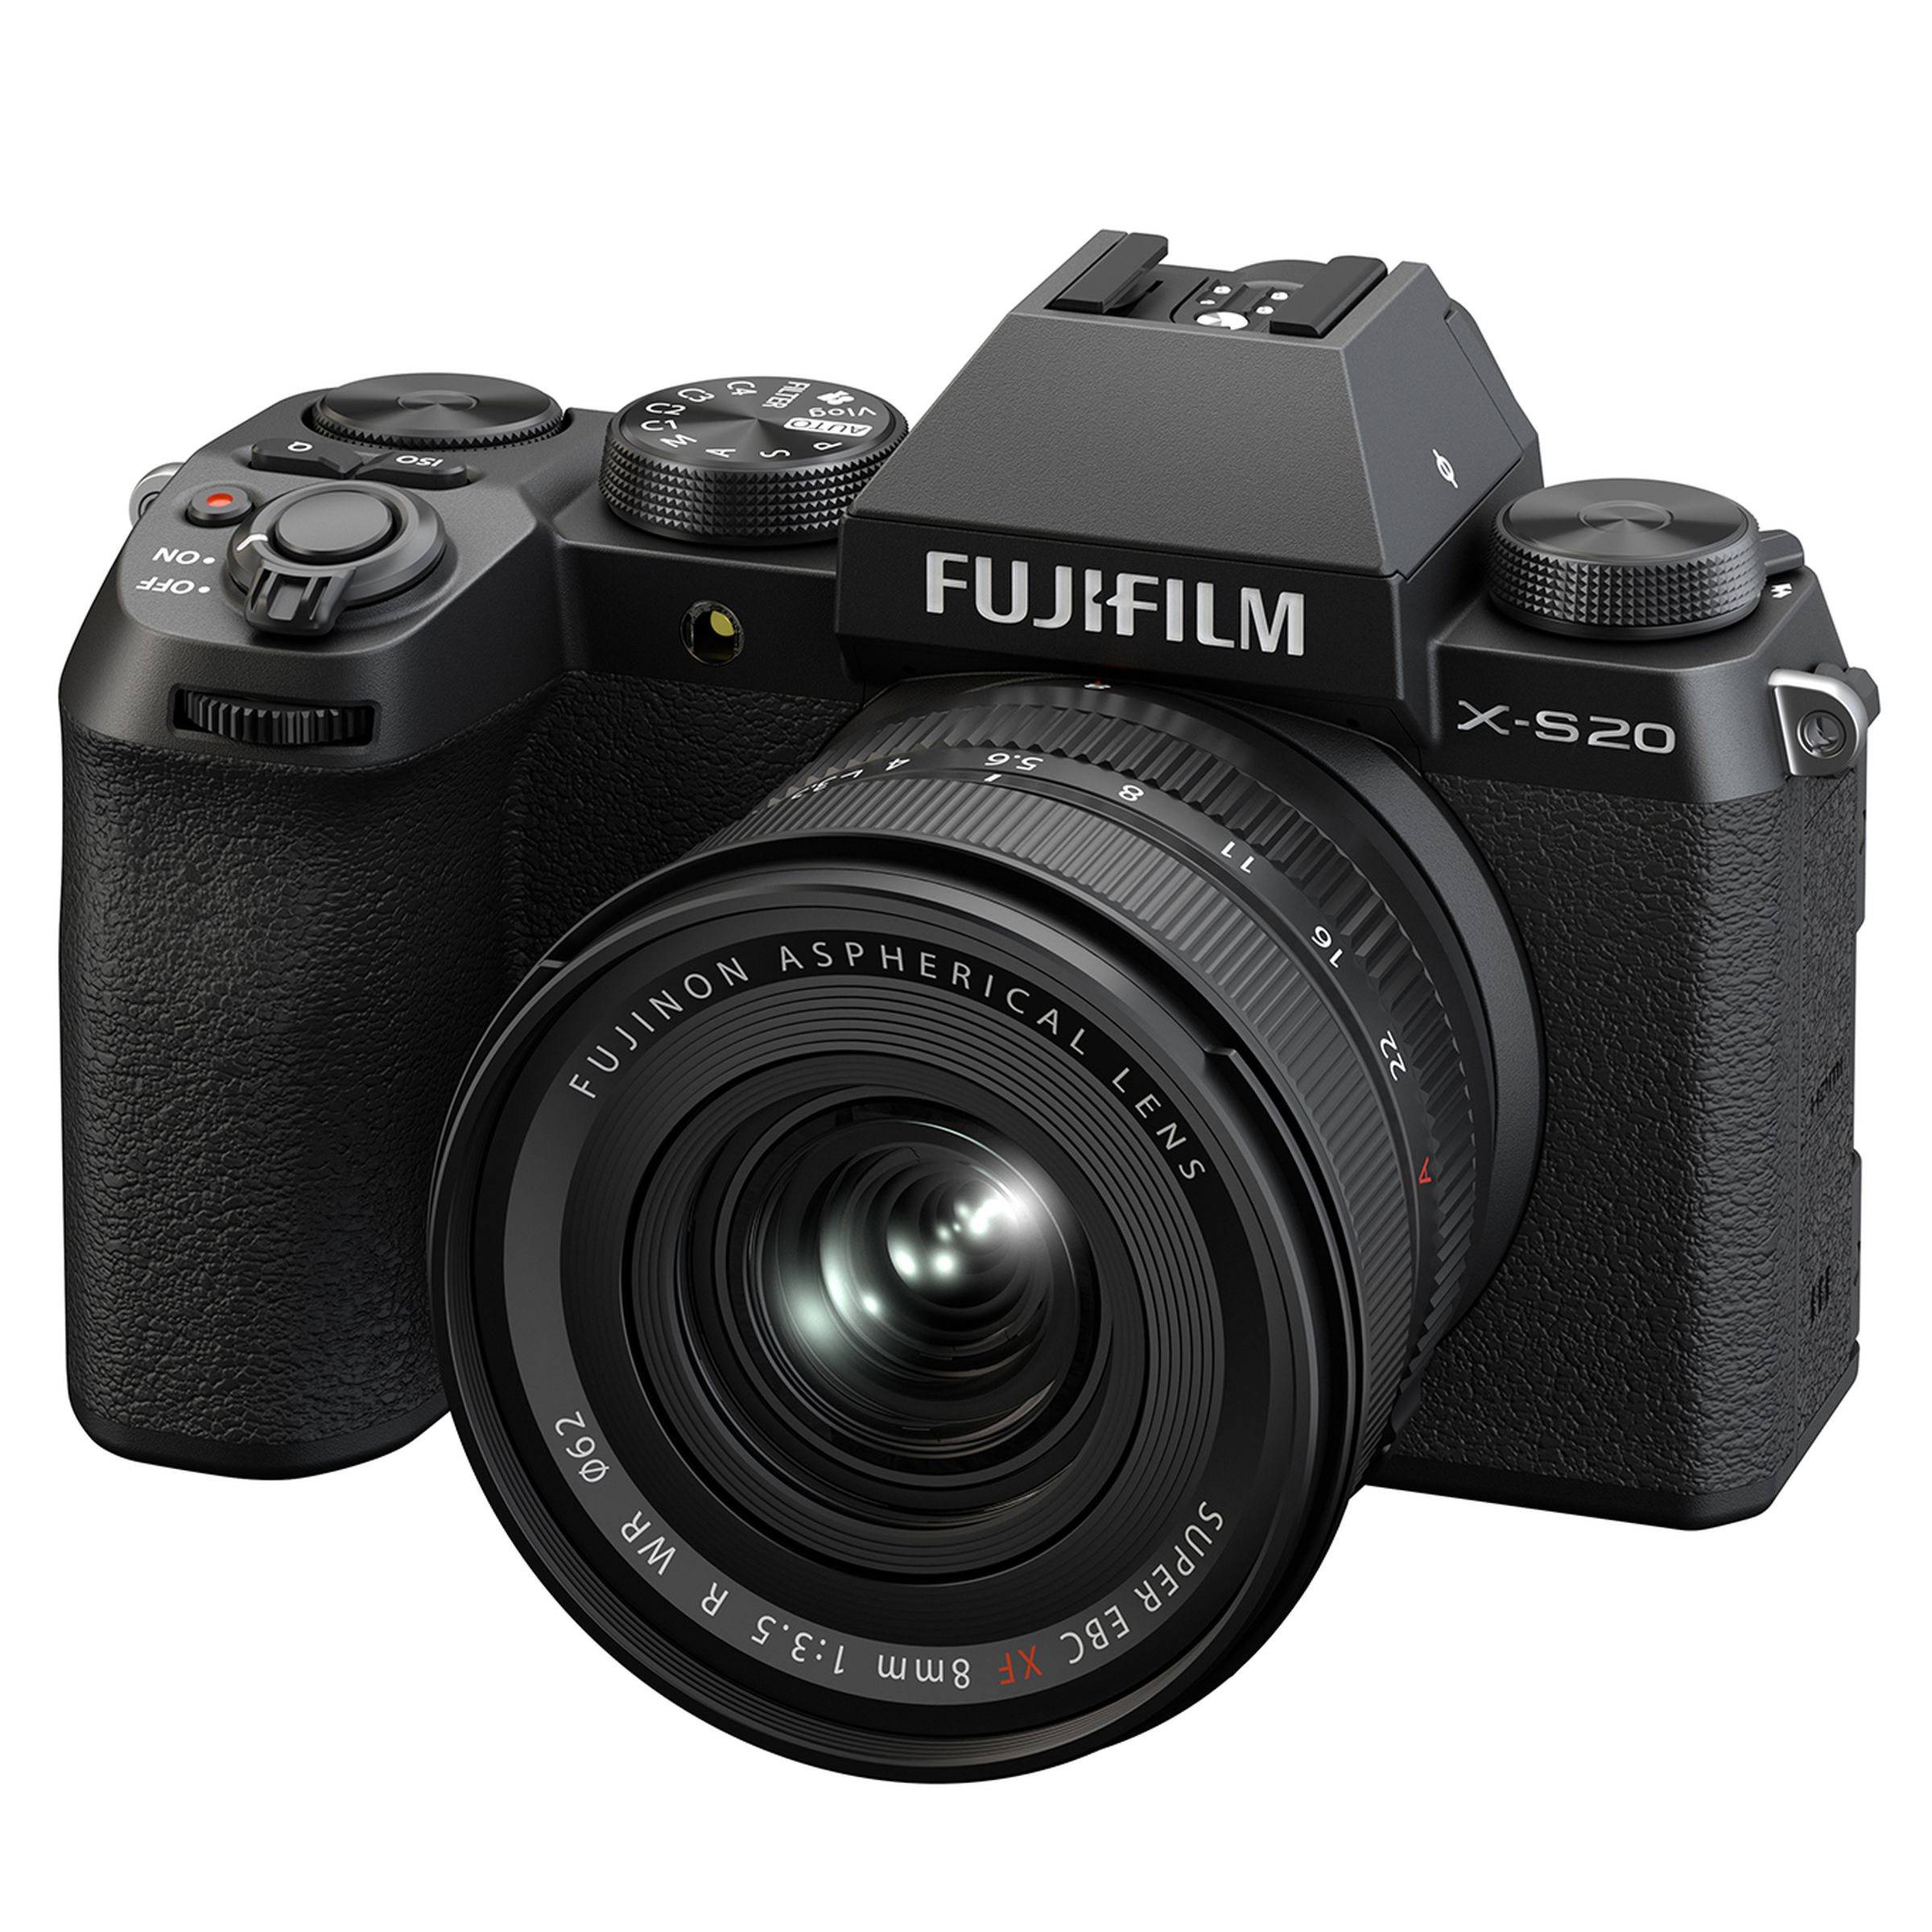 The Fujifilm X-S20 camera with an 8mm lens mounted on it, in front of a white background.